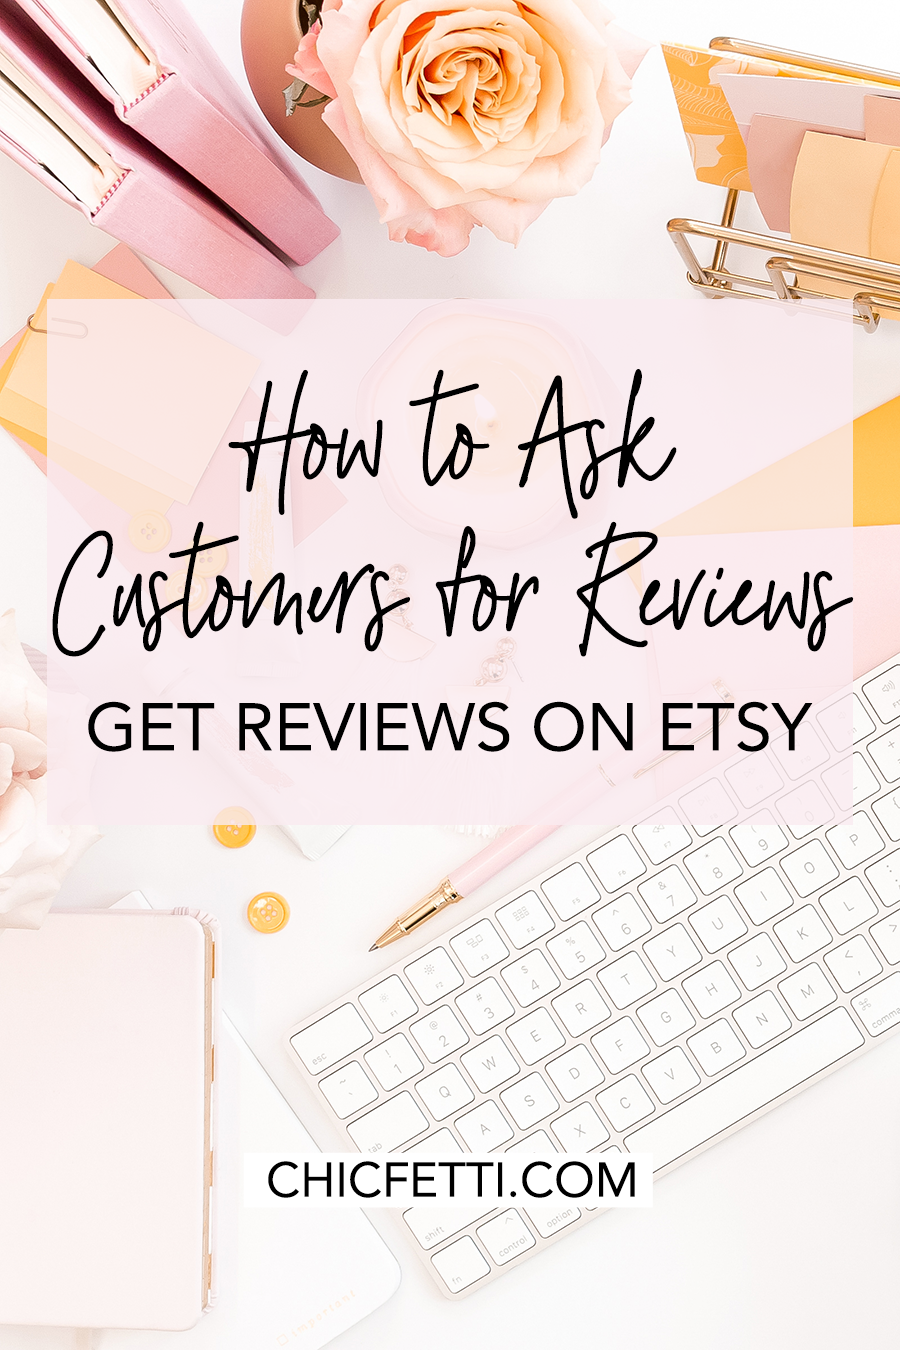 How to Ask Customers for Reviews on Etsy - Tips to getting ...